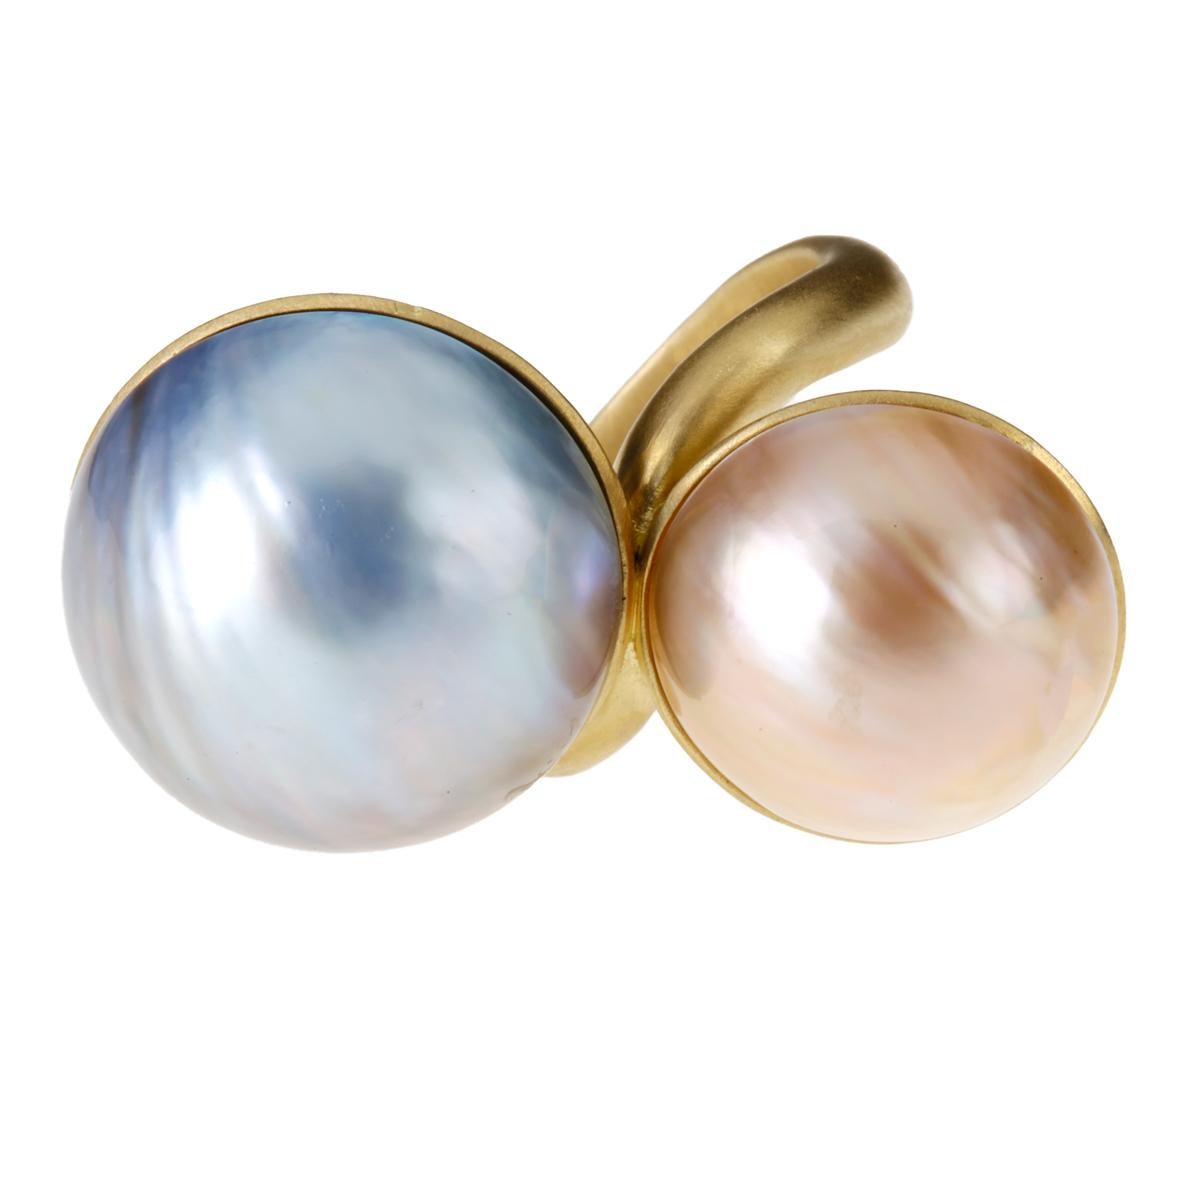 Contrarie ring with 2 Mabè natural  pearls different color grey and gold one,  18 kt yellow gold kt 10,10, size 14 eu.
Hand made pieces made in Italy.
All Giulia Colussi jewelry is new and has never been previously owned or worn. Each item will